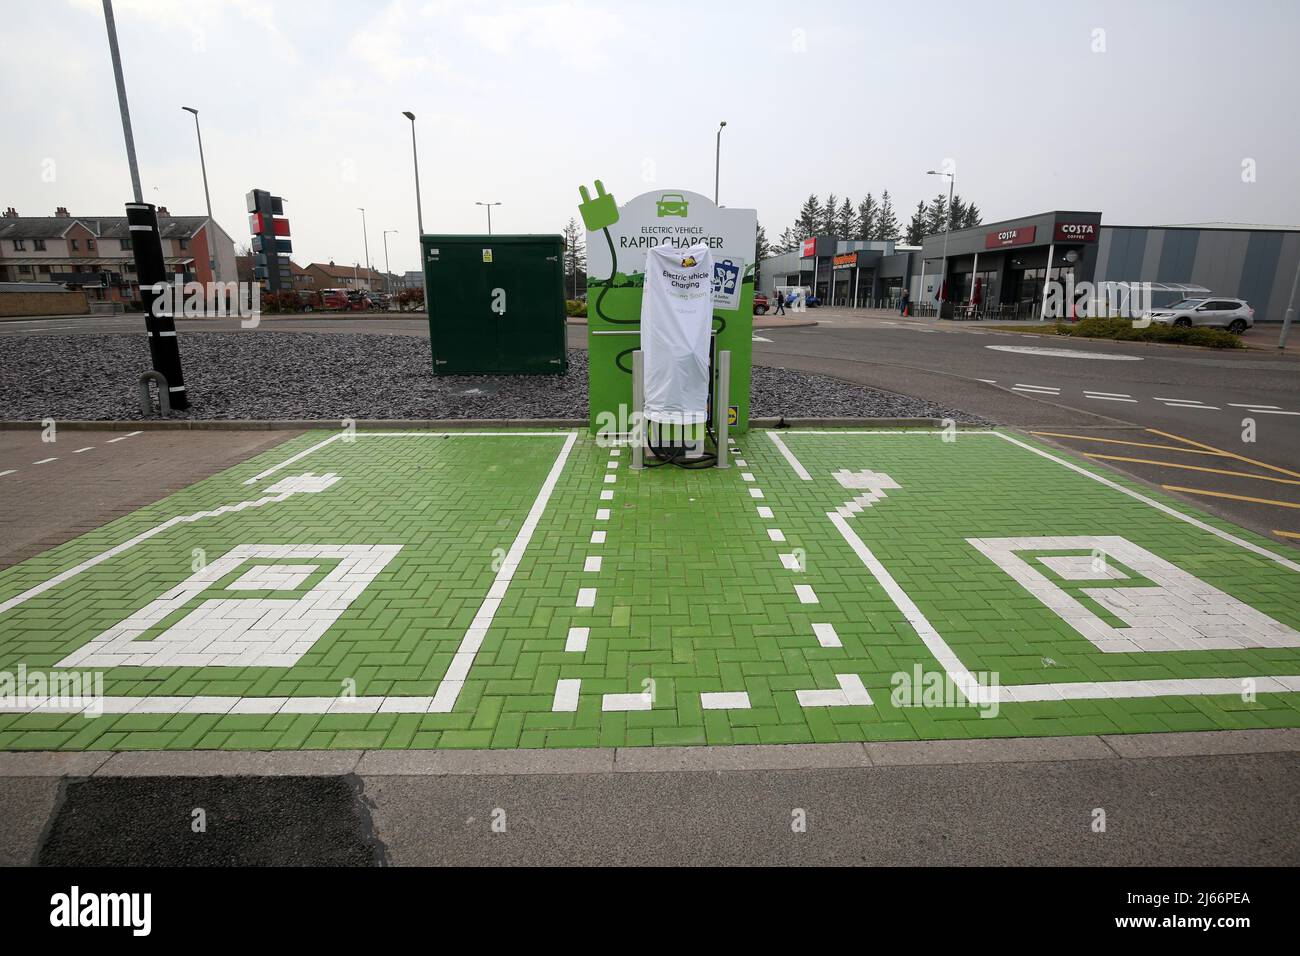 Lidl Supermarket Car Park, Montrose, Angus, Scotland,Uk. Installation of Electric Vehicle Charging Pointin car park, still in process of being installed with cover over the charger say 'Electric Vehicle Charging Coming Soon ' Stock Photo